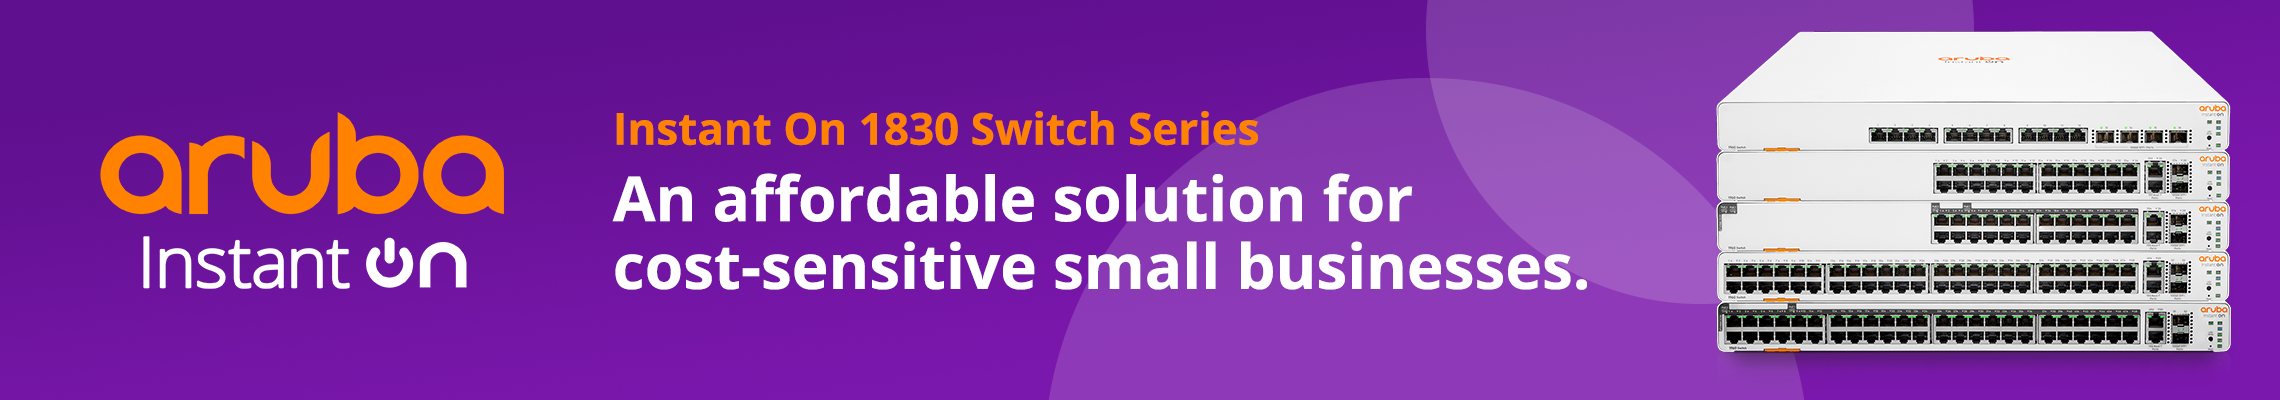 Aruba Instant On 1830 Switch Series banner